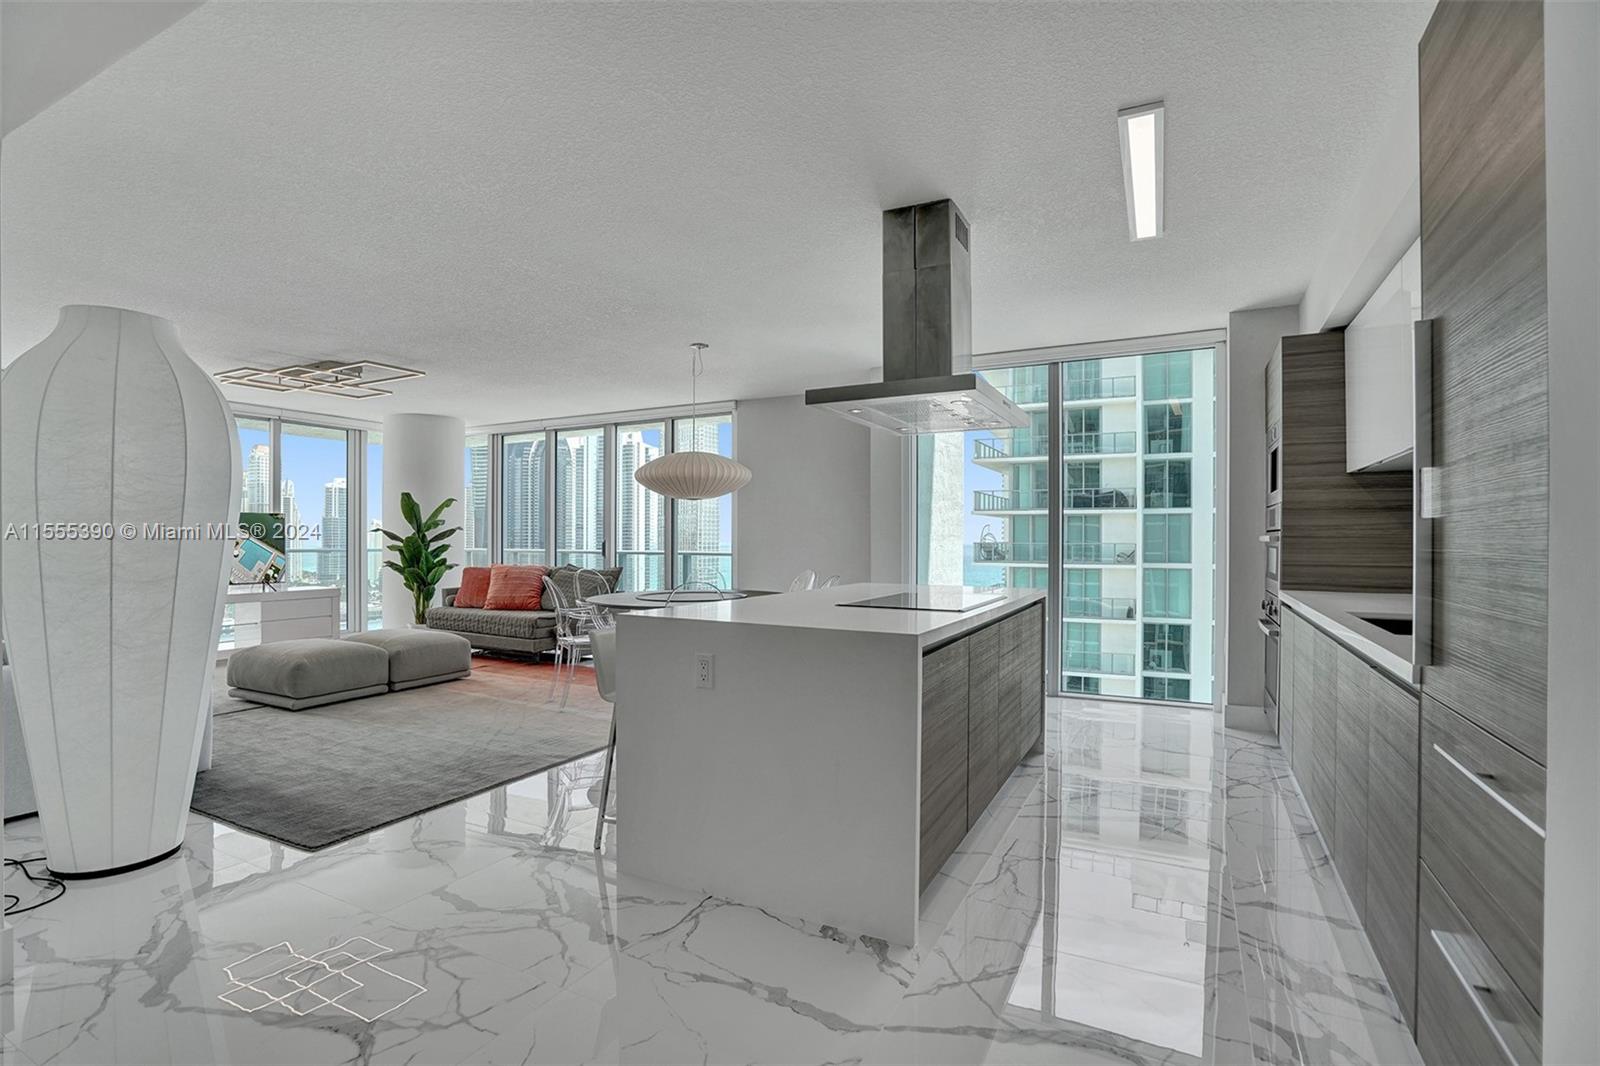 Spacious 3 bedroom/3.5 bathroom corner unit for sale at the desirable parque Towers in Sunny Isles Beach! This well kept gem is one of a kind, featuring a wrap around balcony, open living areas, porcelain floors throughout the unit, and stunning panoramic views of the Atlantic Ocean, Miami Skyline, and the Intracoastal. This unit is fully furnished to the last detail and equipped with top of the line appliances. Luxurious amenities in the building include 4 pools, gym, spa, cinema, kids rooms, bar, bistro, and much more! Schedule a showing and fall in love with your new nome.